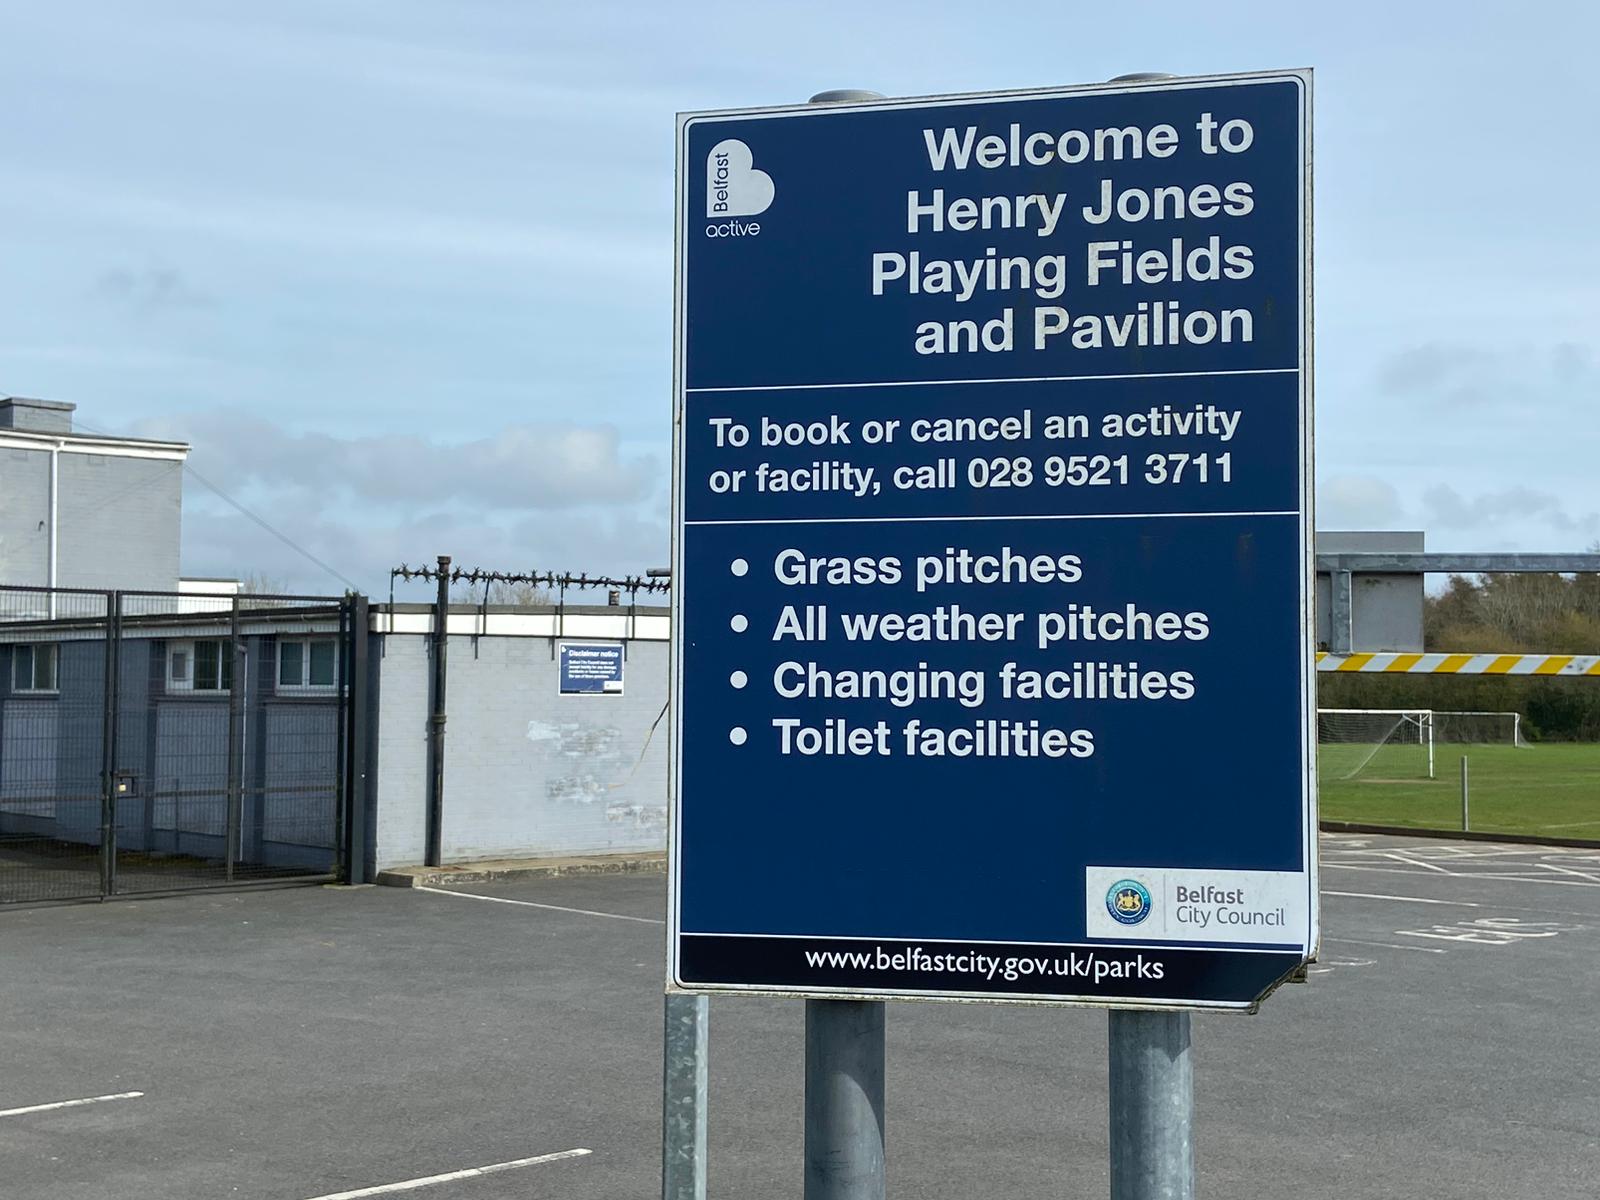 ARSON: The latest arson attack at Henry Jones Playing Field is being treated as a hate crime